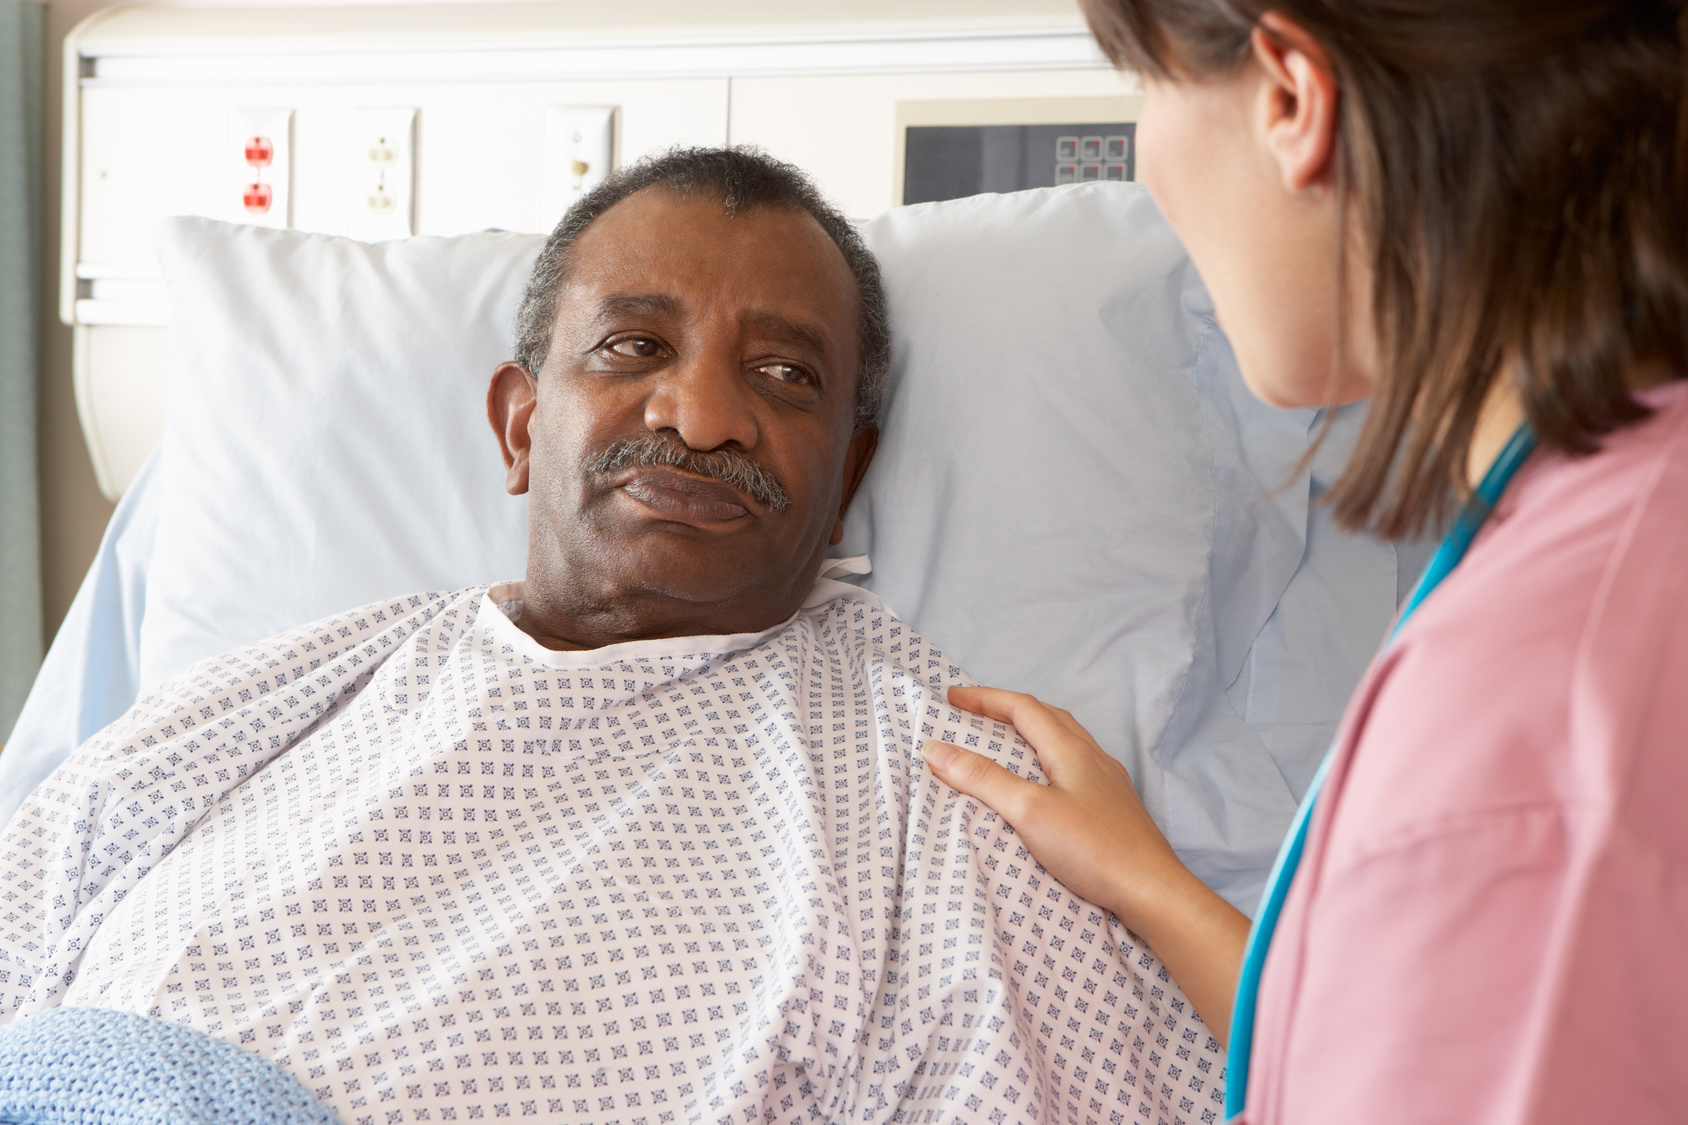 A Hospital’s Human Touch: Why Taking Care In Discharging A Patient Matters